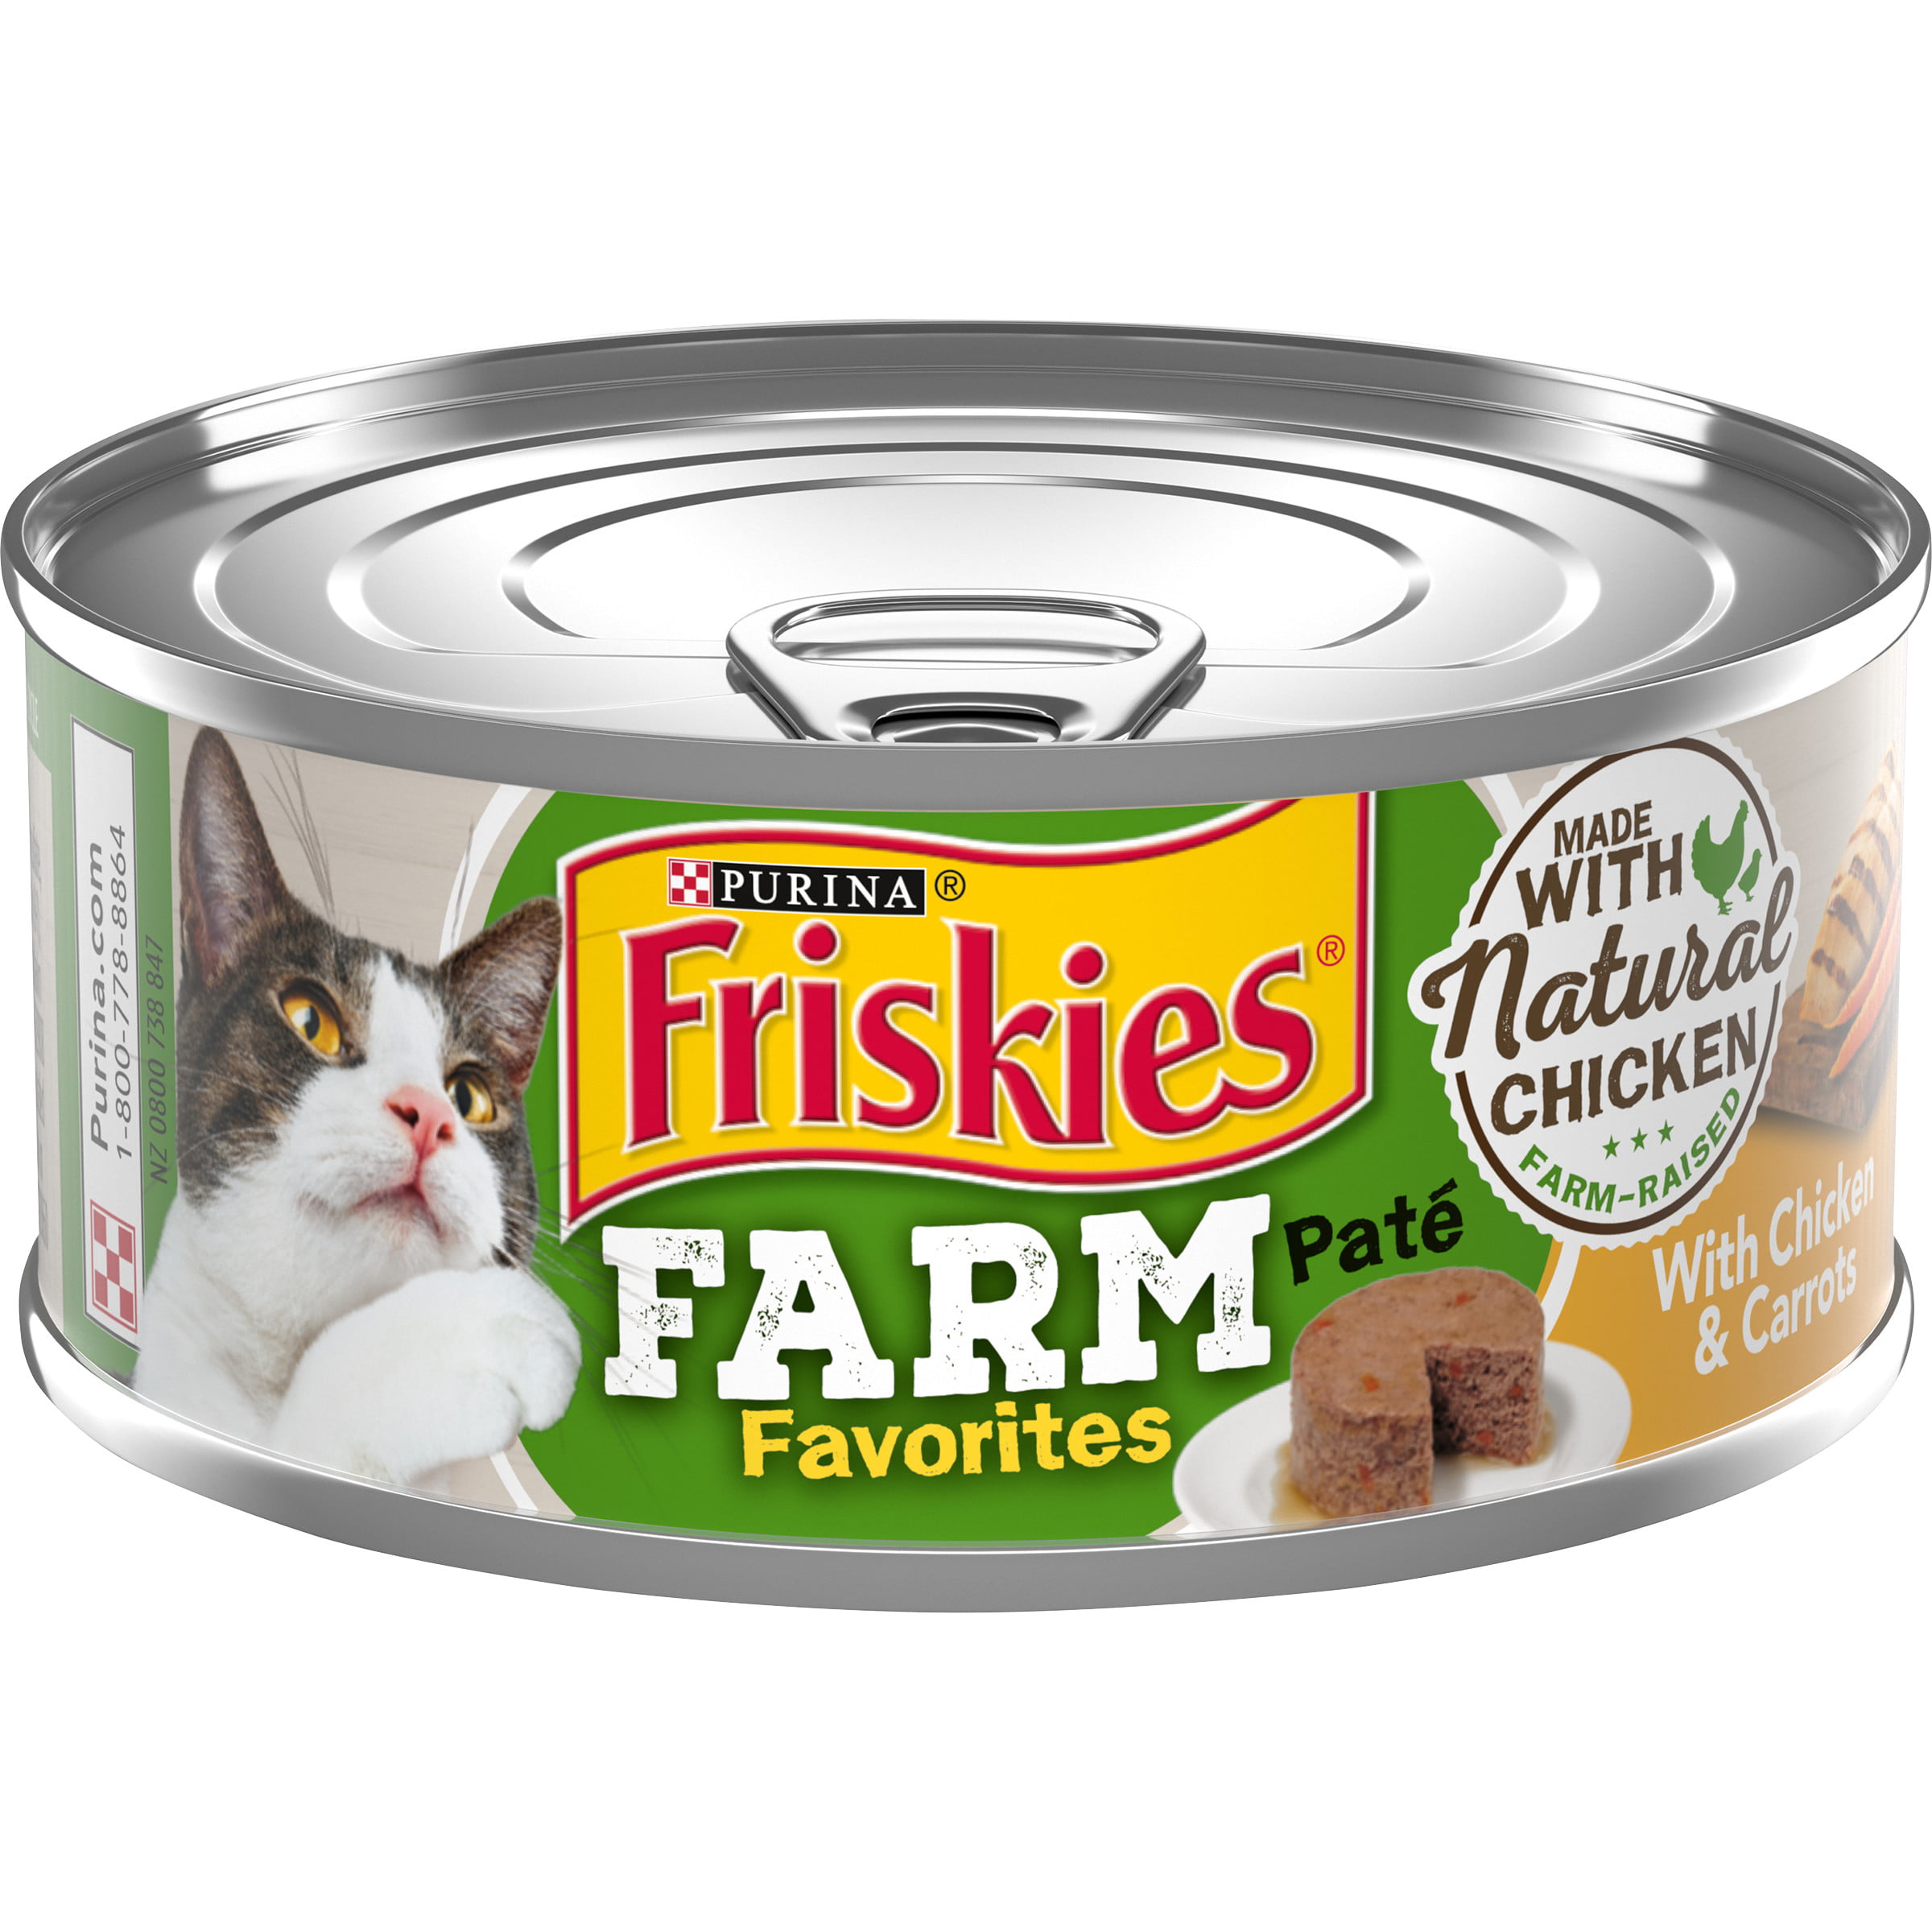 Friskies Pate Wet Cat Food, Farm Favorites With Chicken, 5.5 oz. Pull